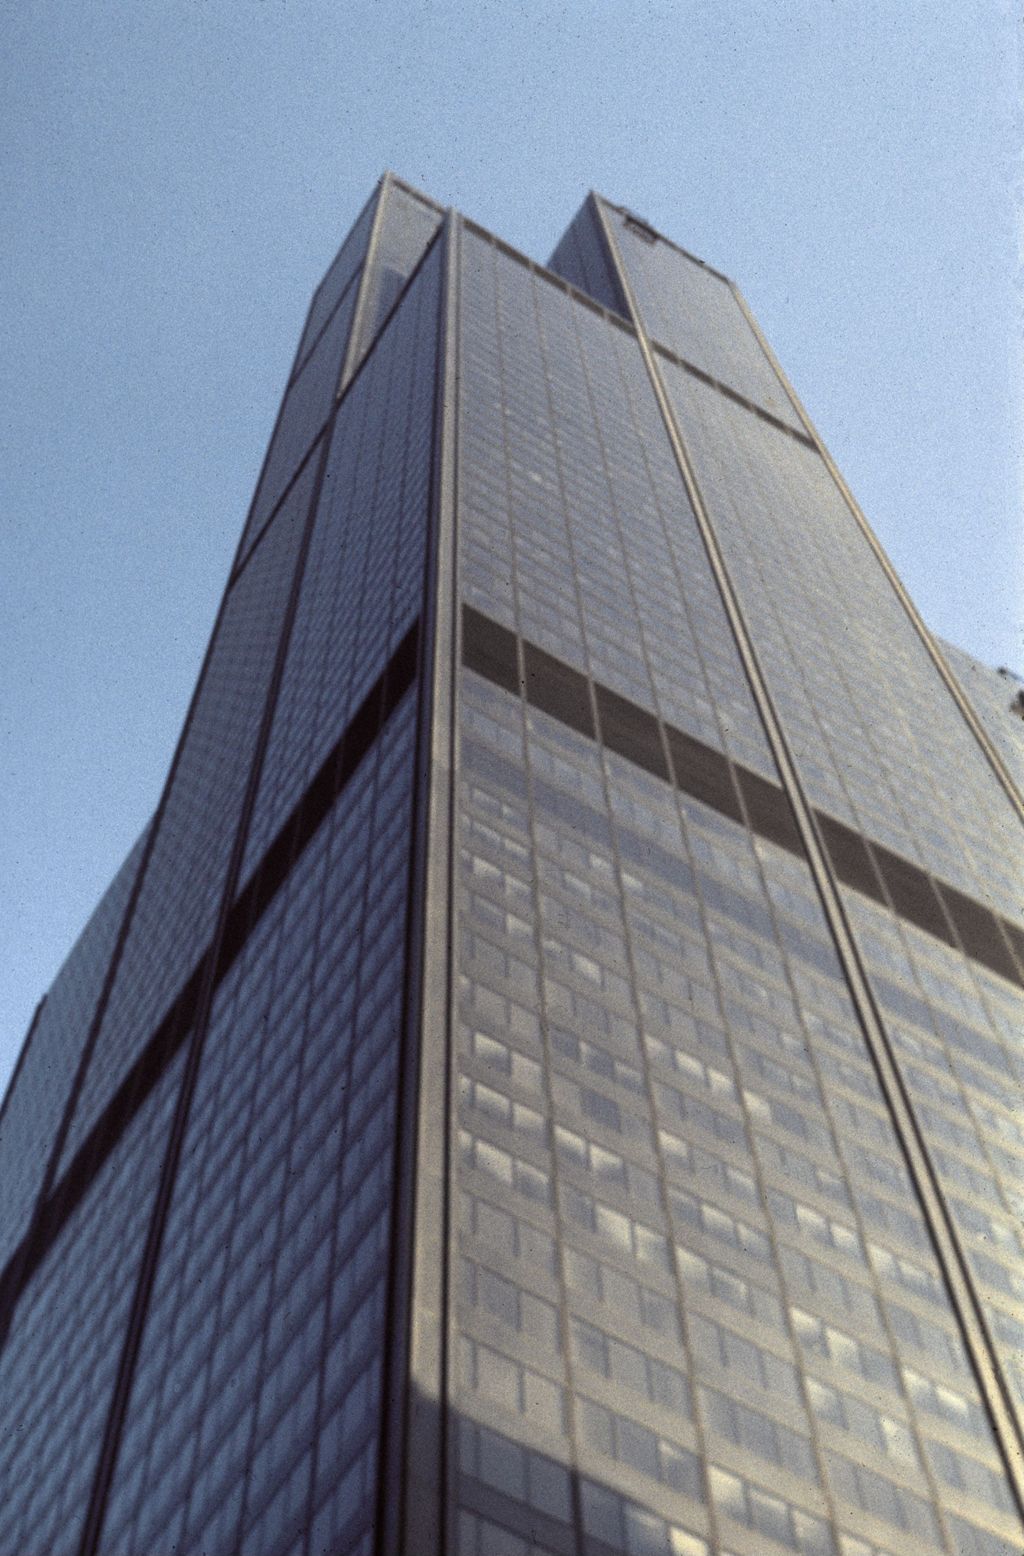 Miniature of Sears Tower